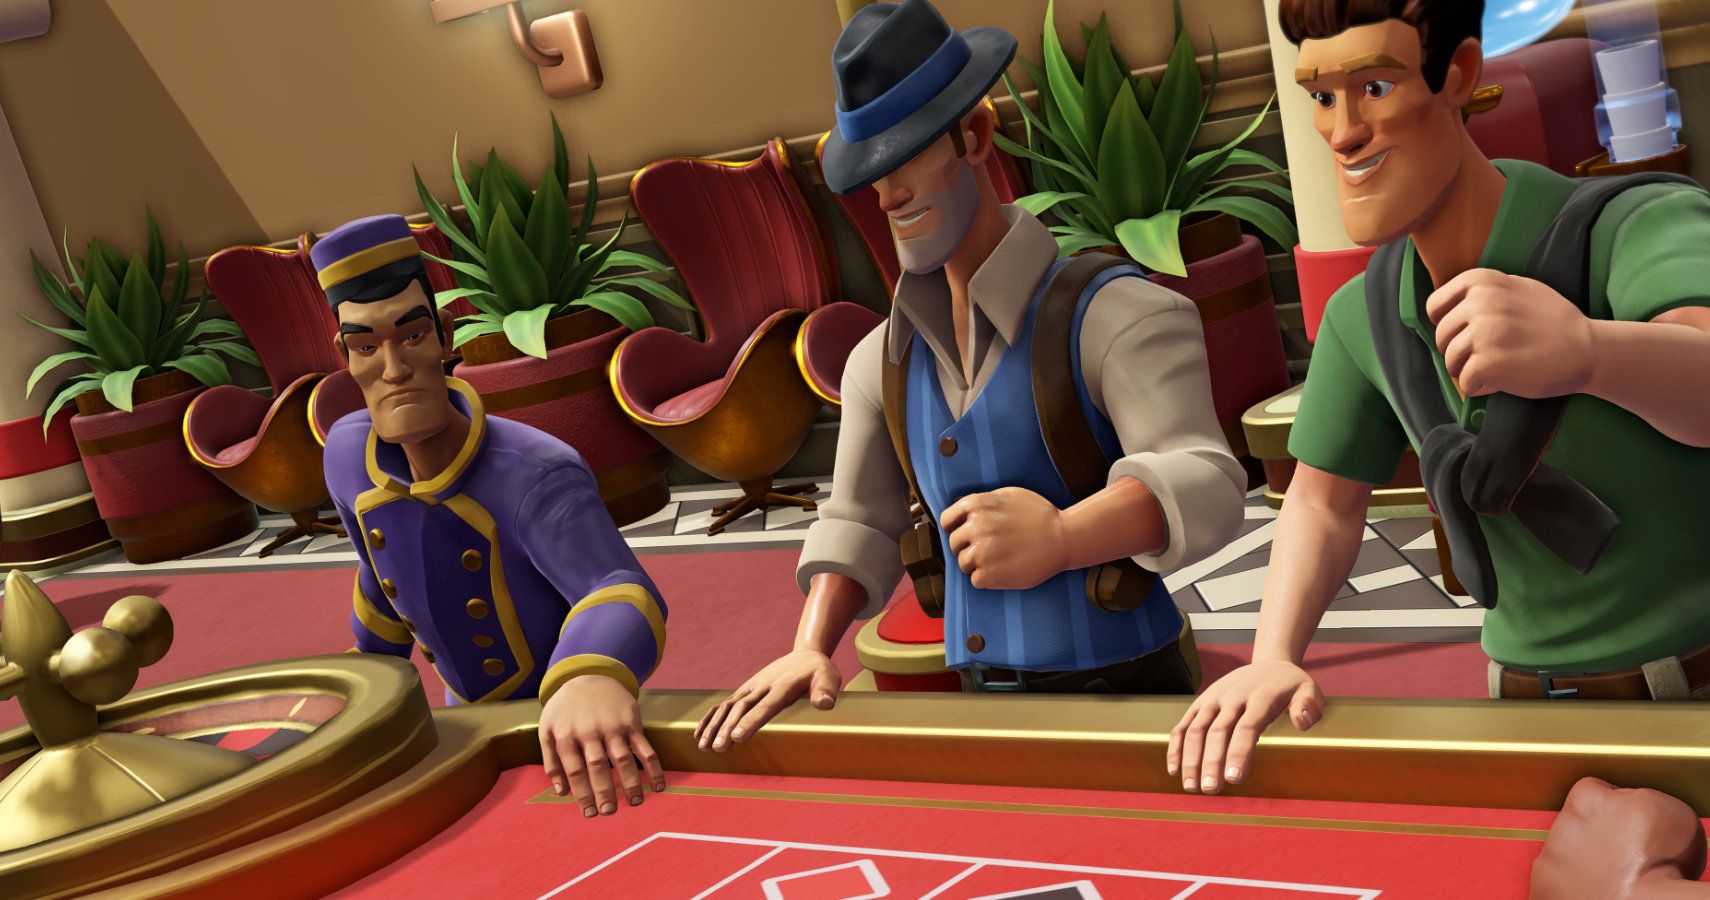 Agents playing roulette in the casino.